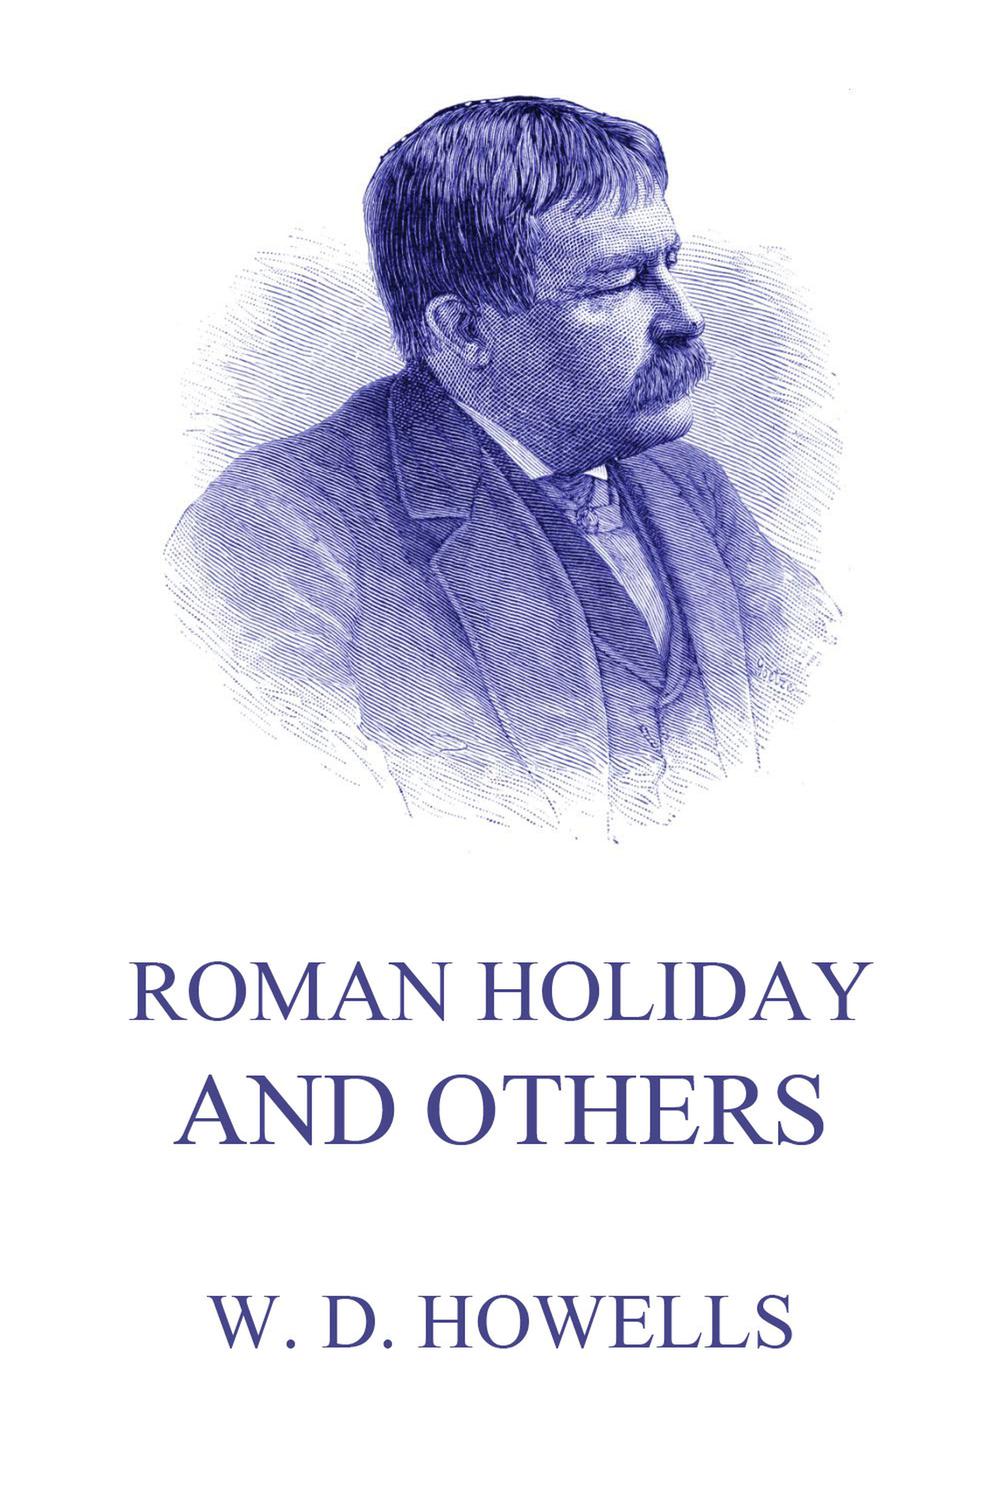 Roman Holidays And Others - William Dean Howells,,